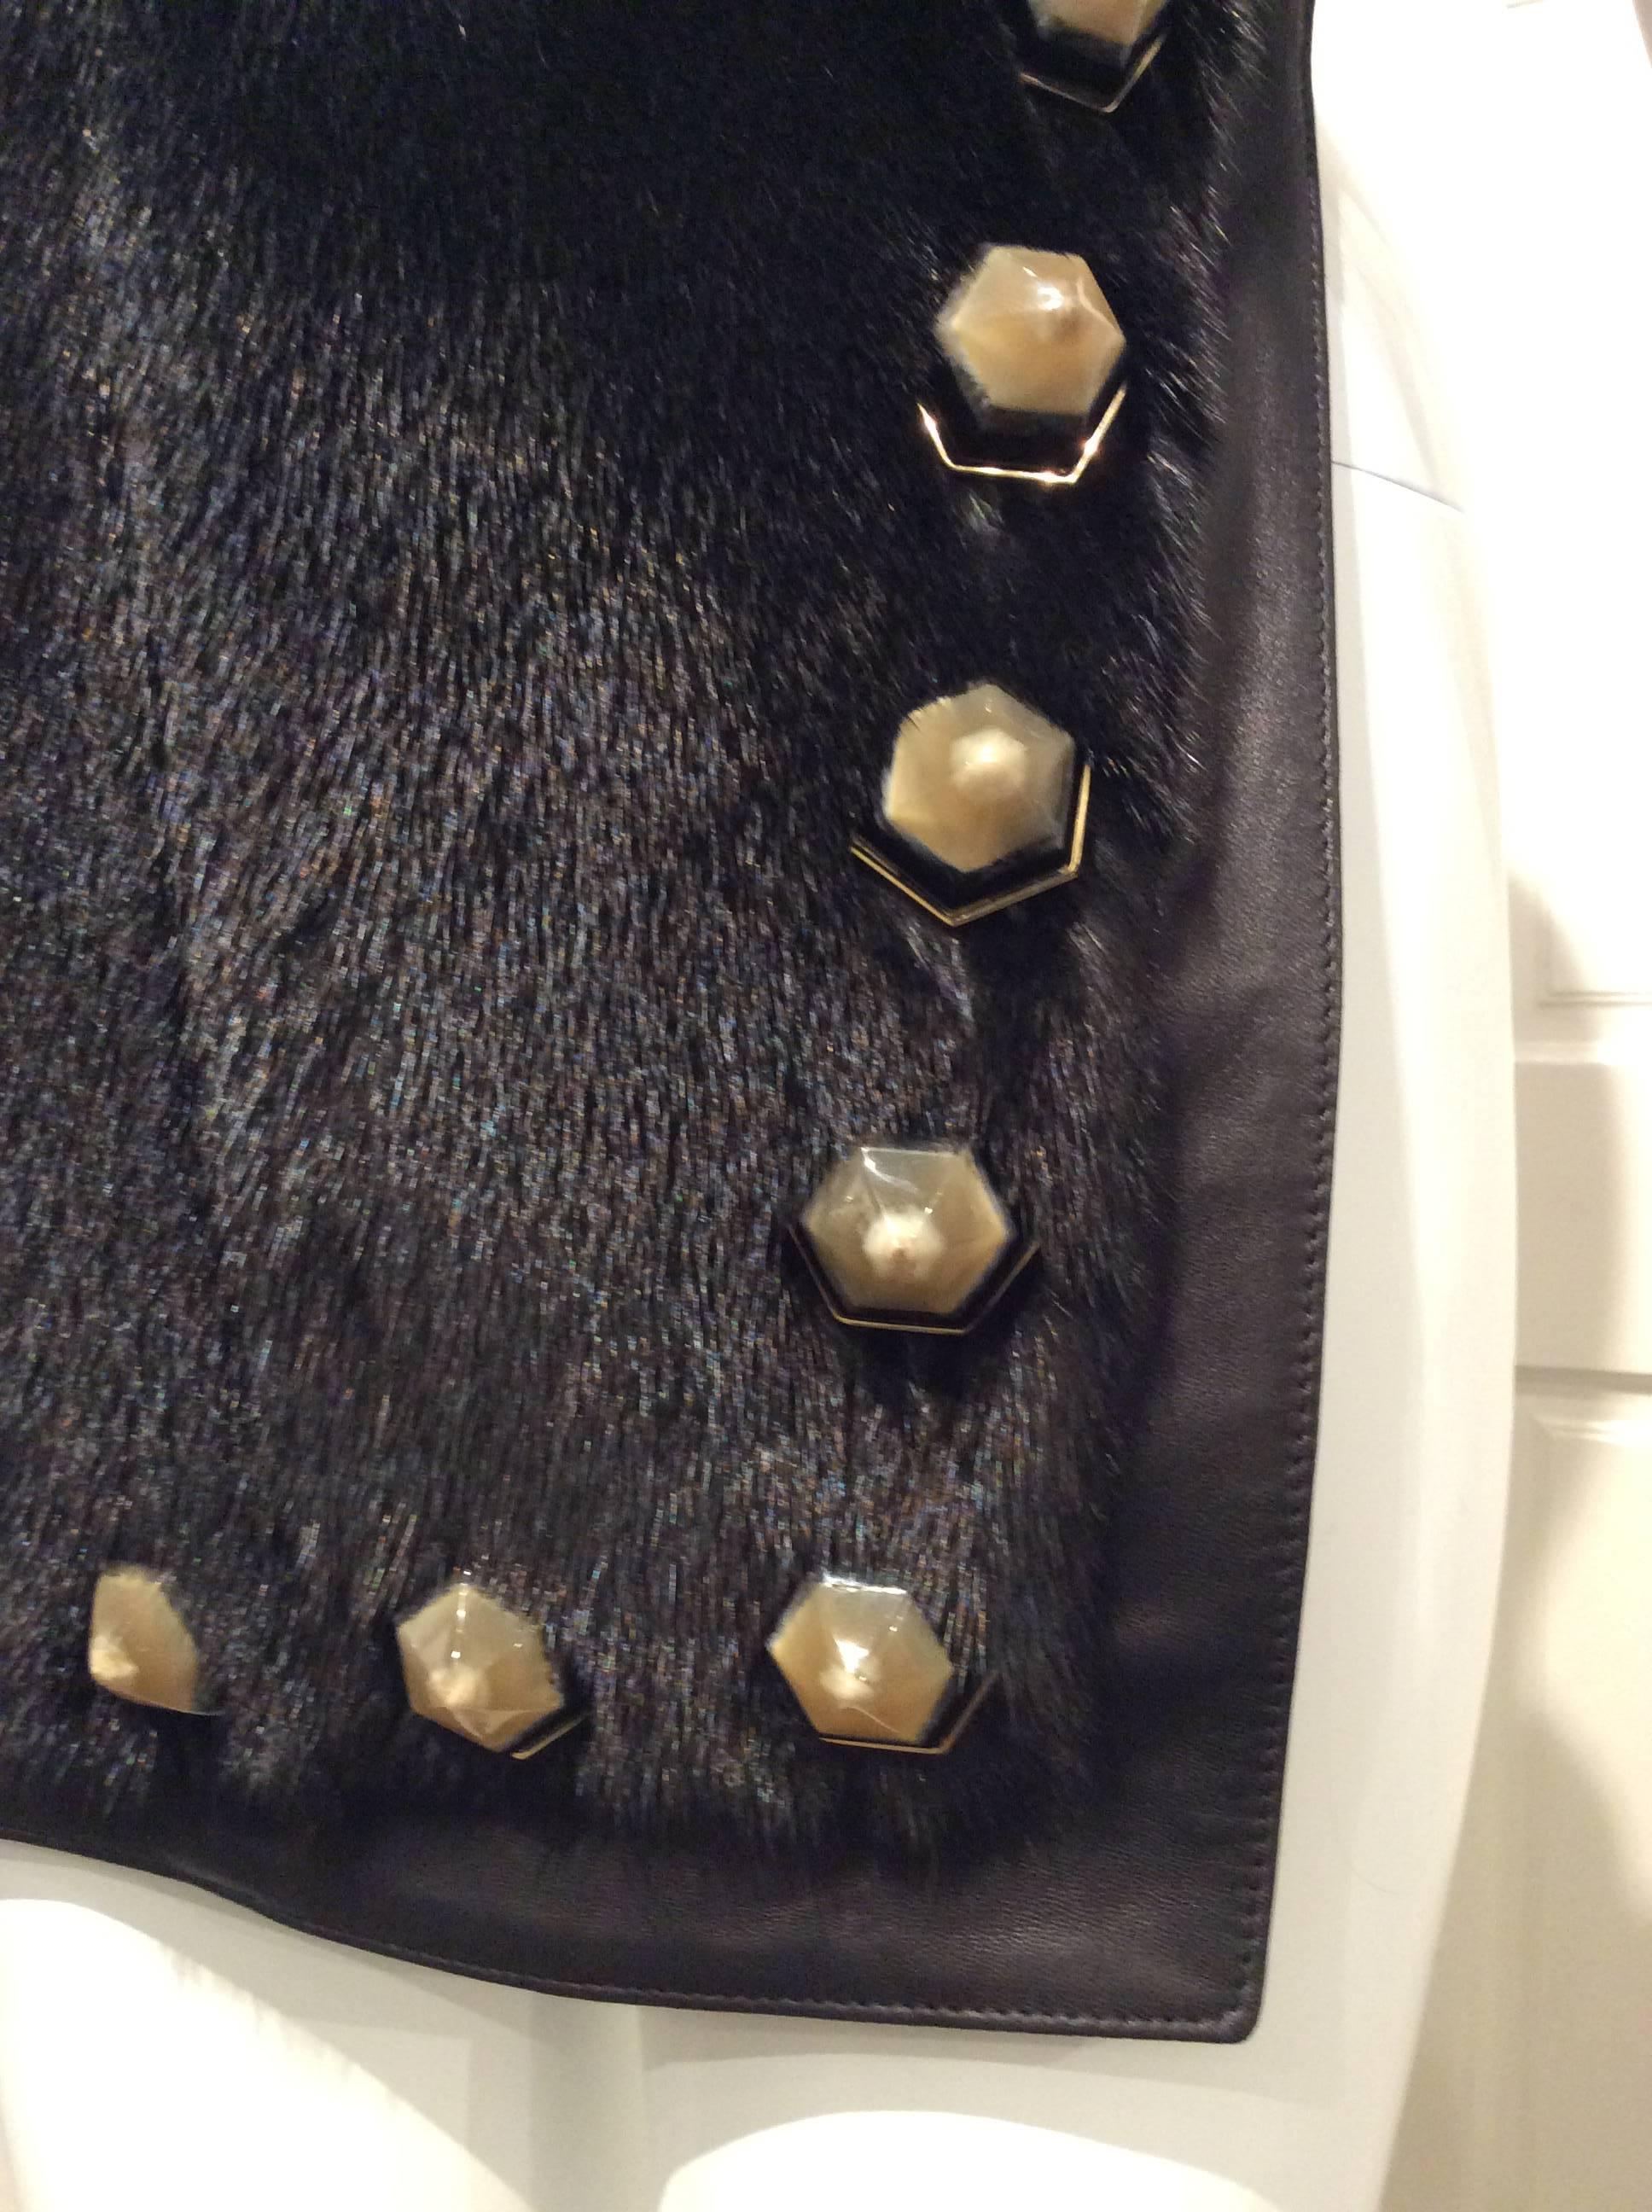 Givenchy Black Mink Tailcoat with Stars Embellishments Sz36 (Us4) For Sale 5